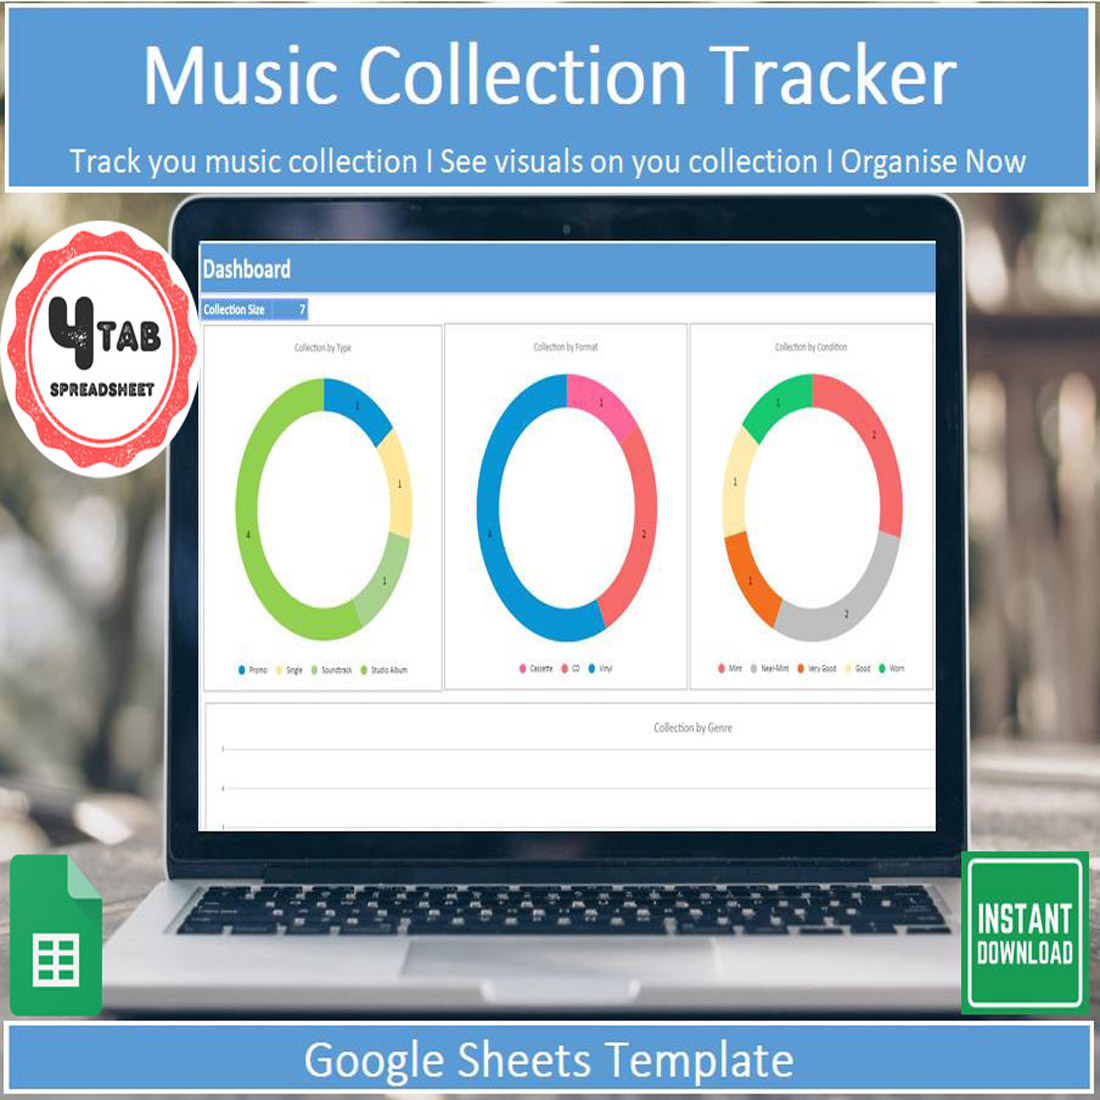 Music Collection Tracker Template cover image.